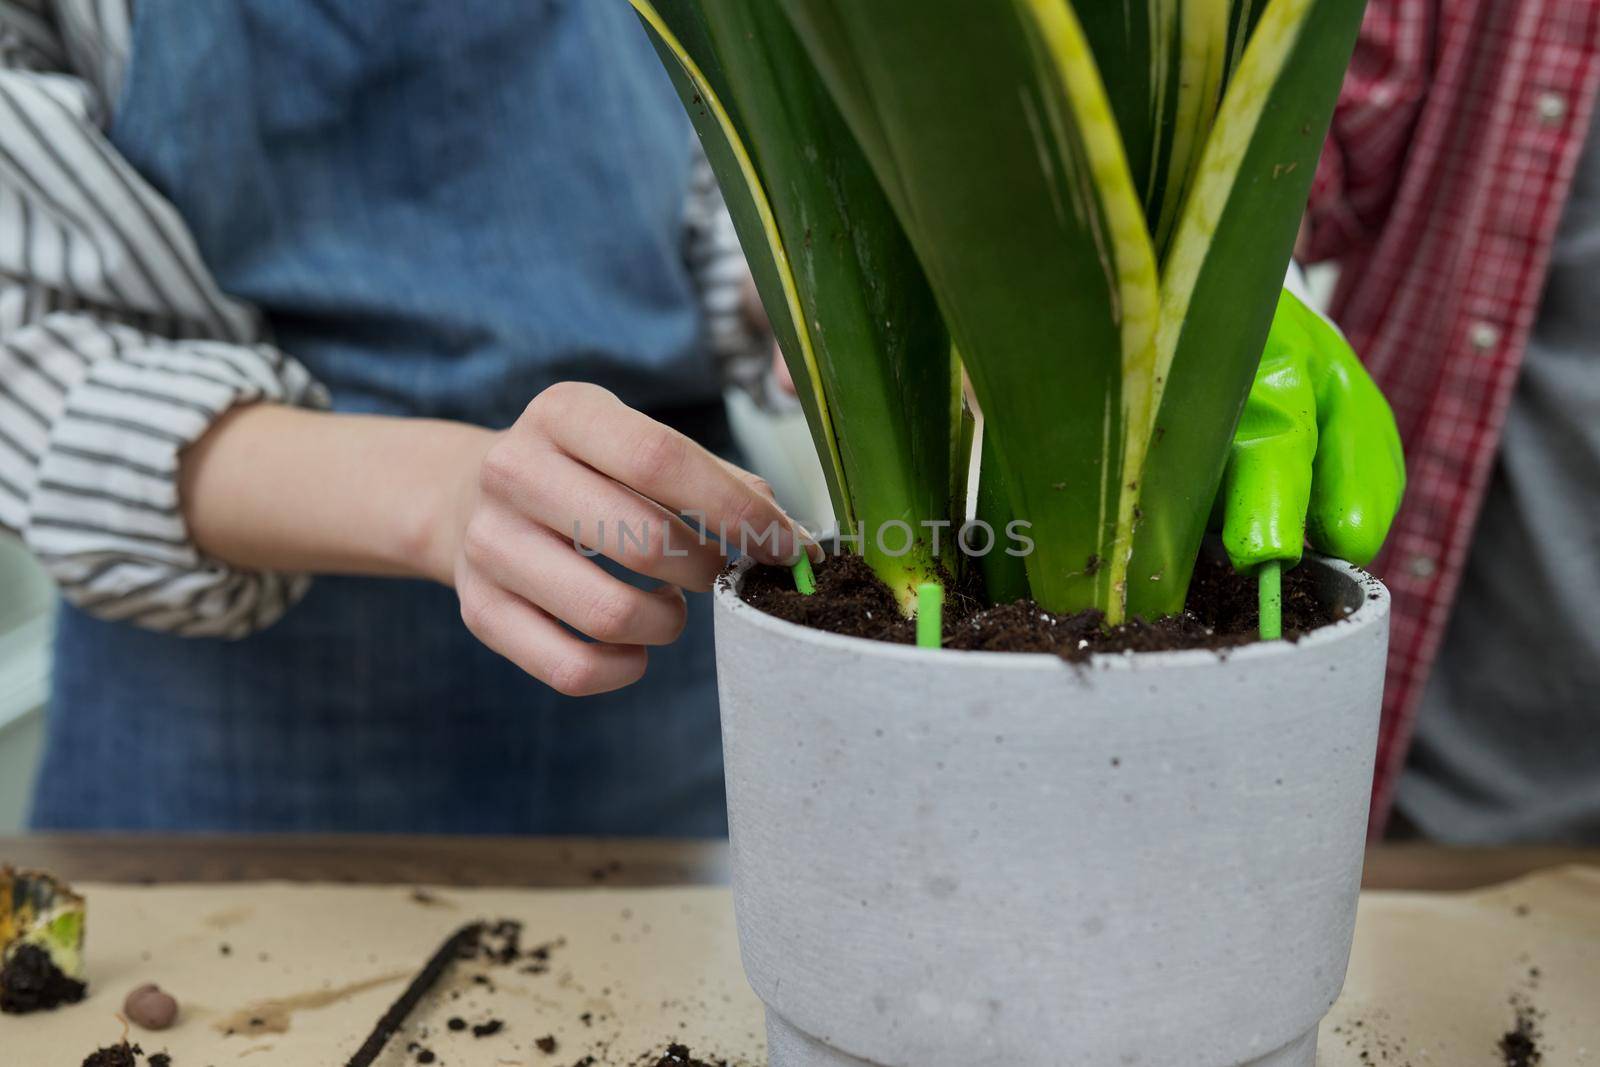 Close-up of woman's hand fertilizing potted sansevieria houseplant with fertilizer, pest repellent in form of sticks. Hobbies, leisure, caring for green pets, trends, gardening at home, garden inside